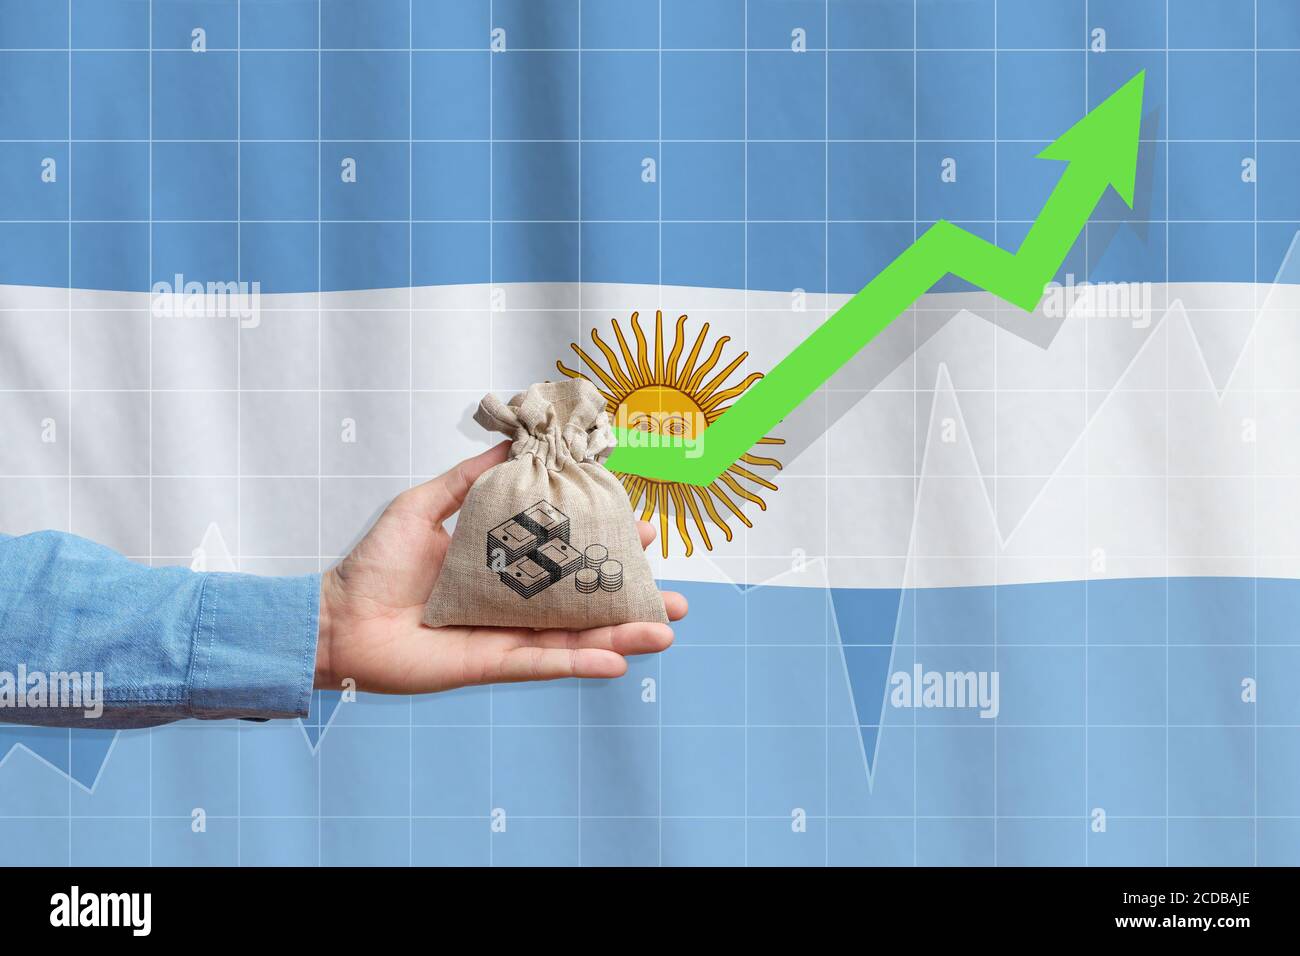 The concept of economic growth in Argentine Republic. Hand holds a bag with money and an upward arrow. Stock Photo